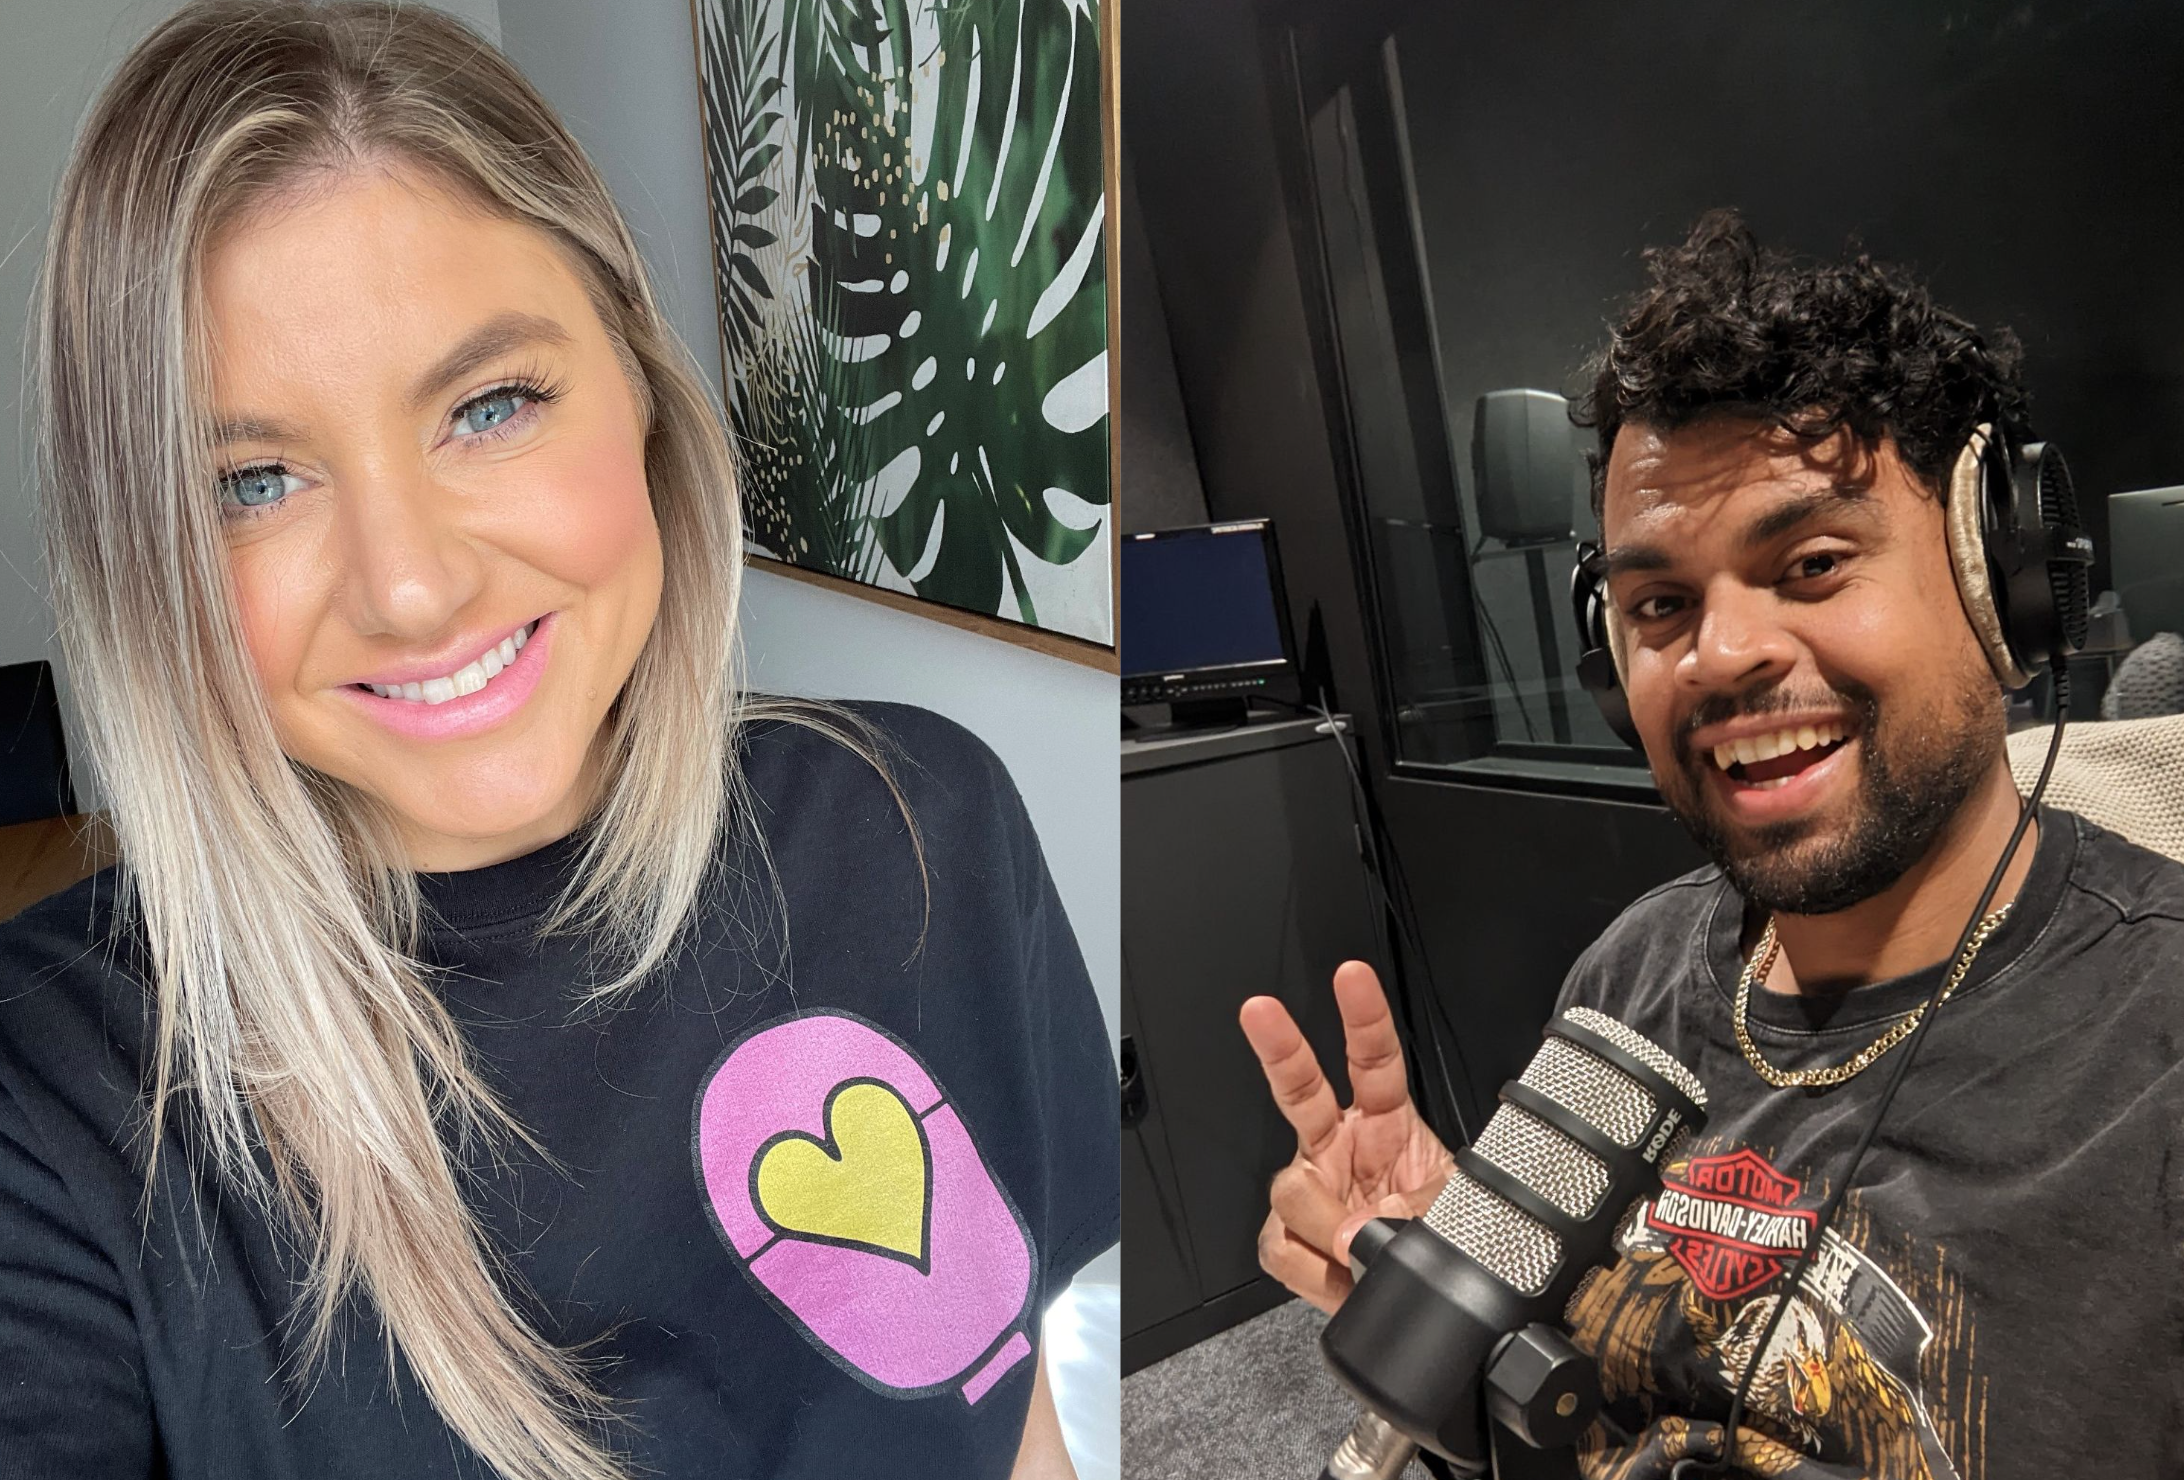 A caucasian woman with blonde hair smiling at the camera , her name is Sarah Starkey and a picture of a man of south east asian descent called Justan Singh smiling at the camera and pulling the peace symbol with his fingers